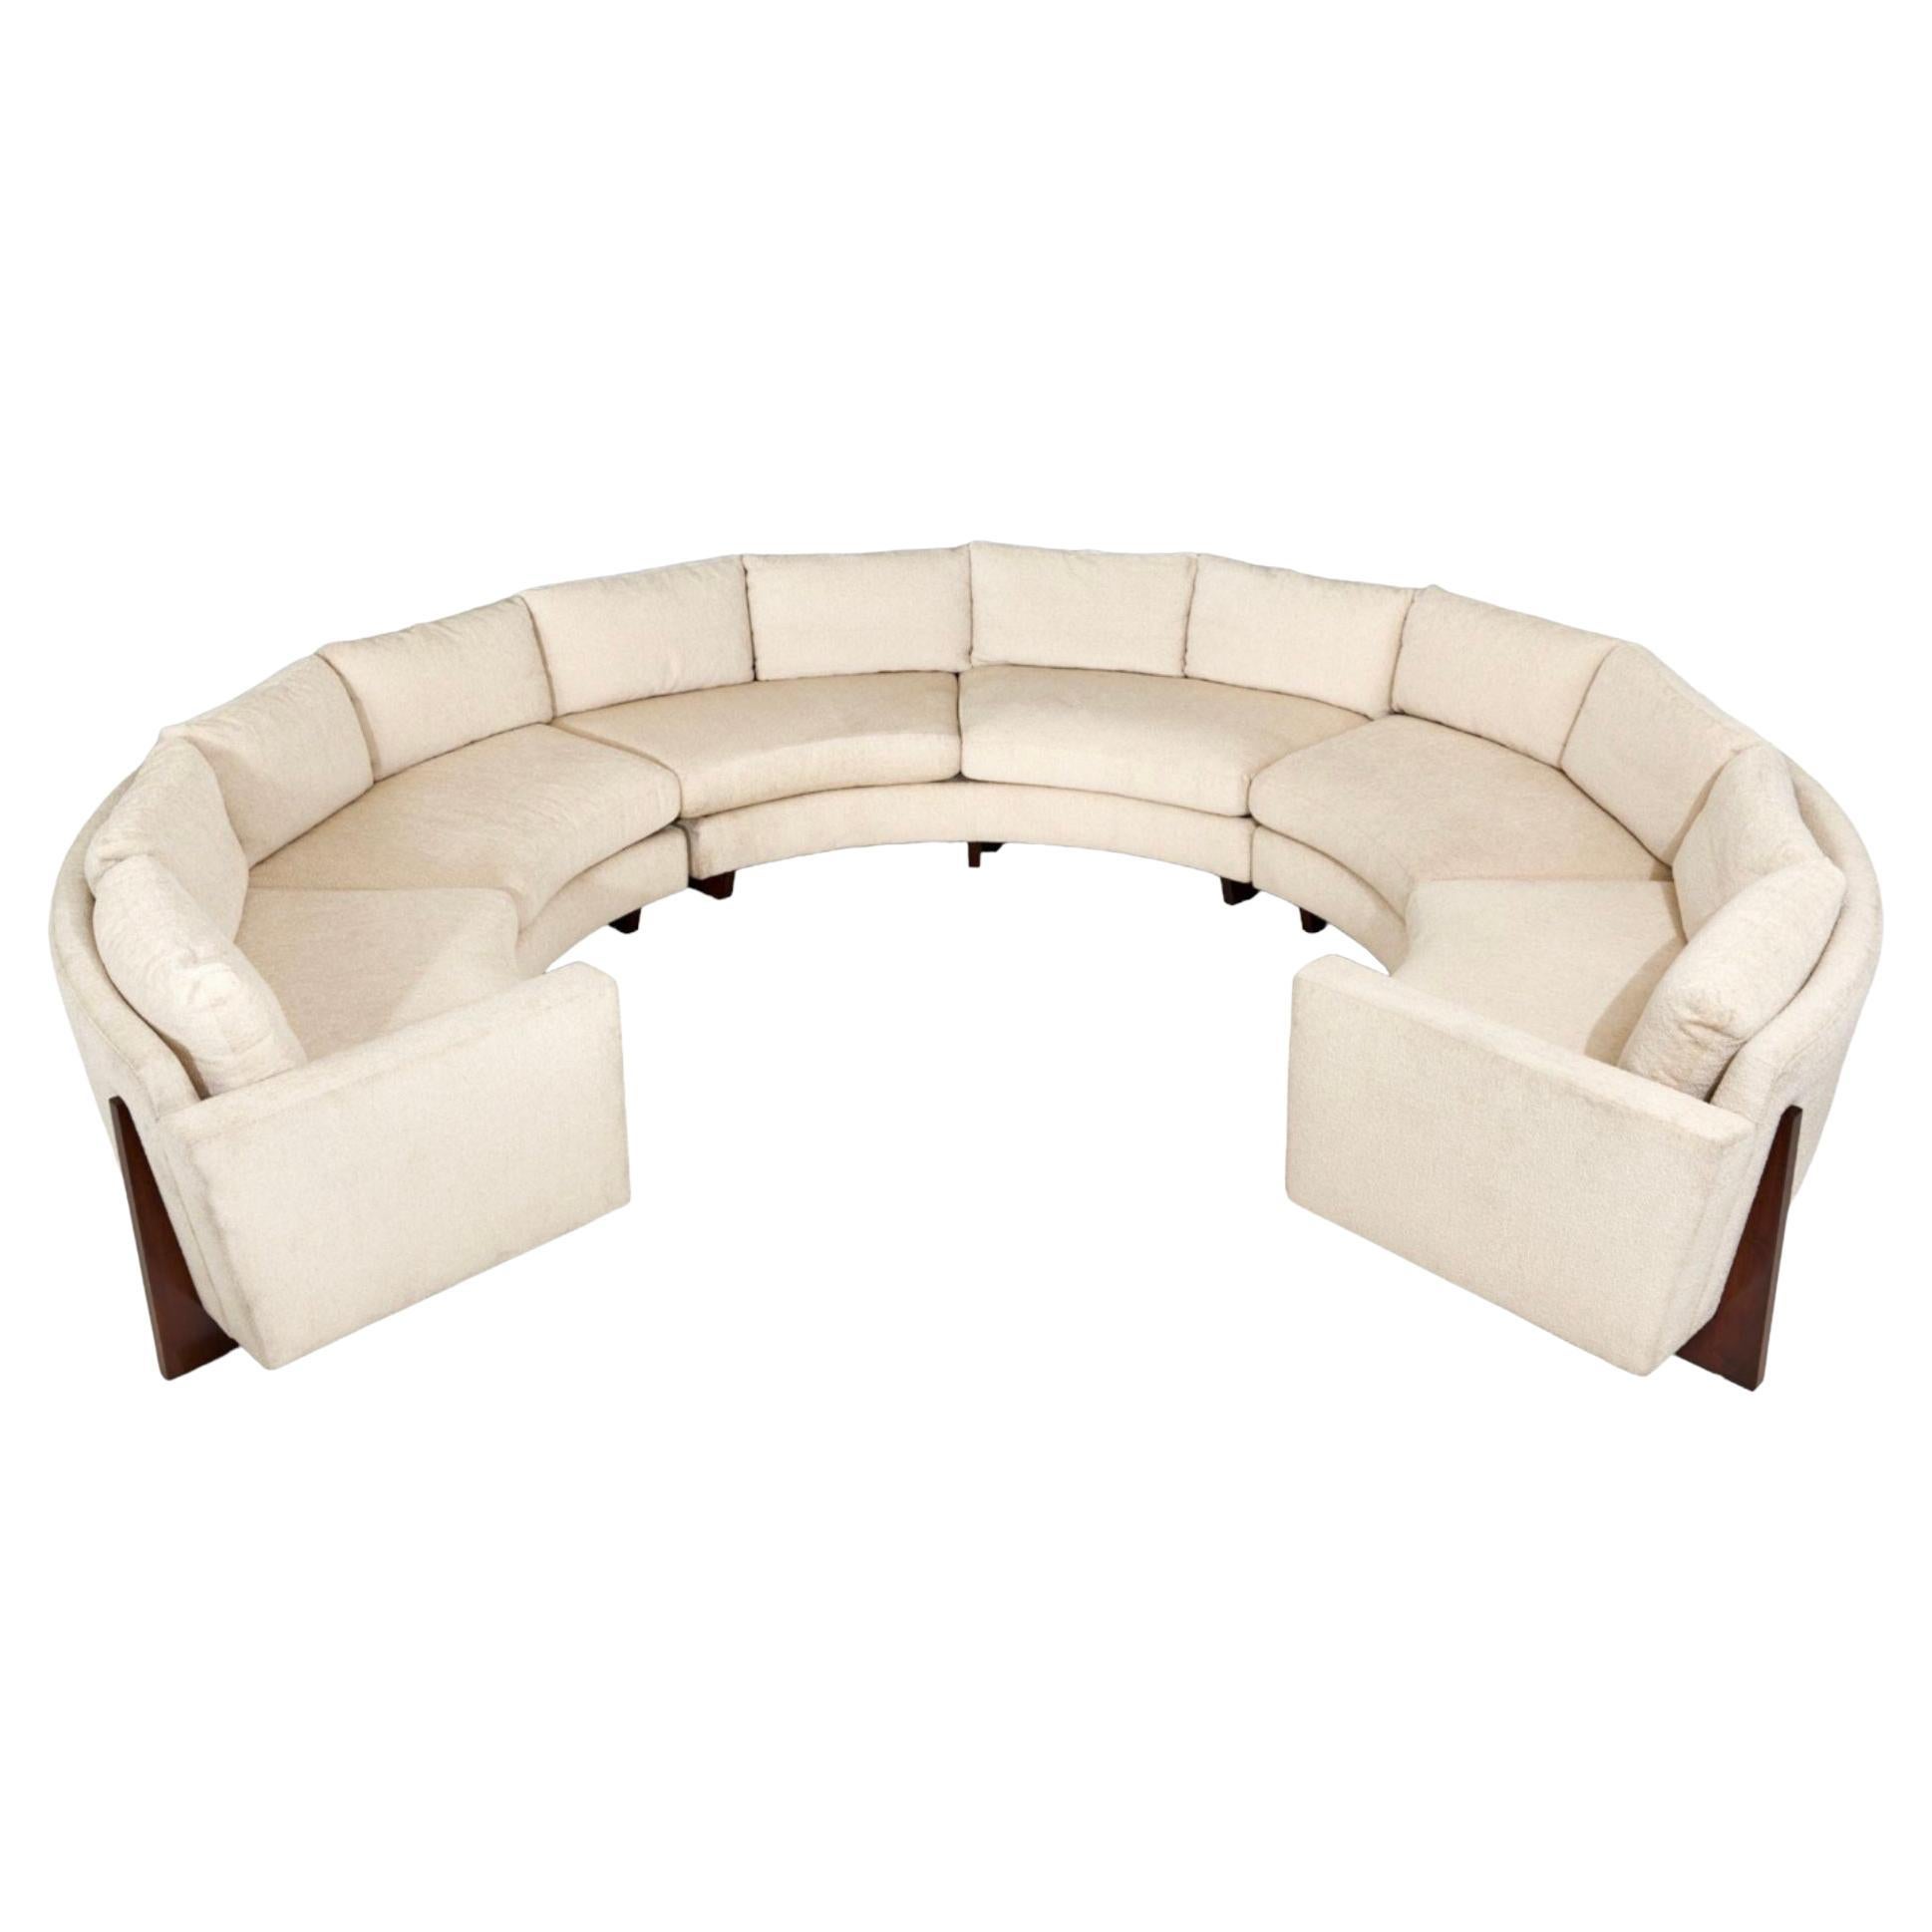 Milo Baughman Cicular Sectional with Walnut Legs For Sale